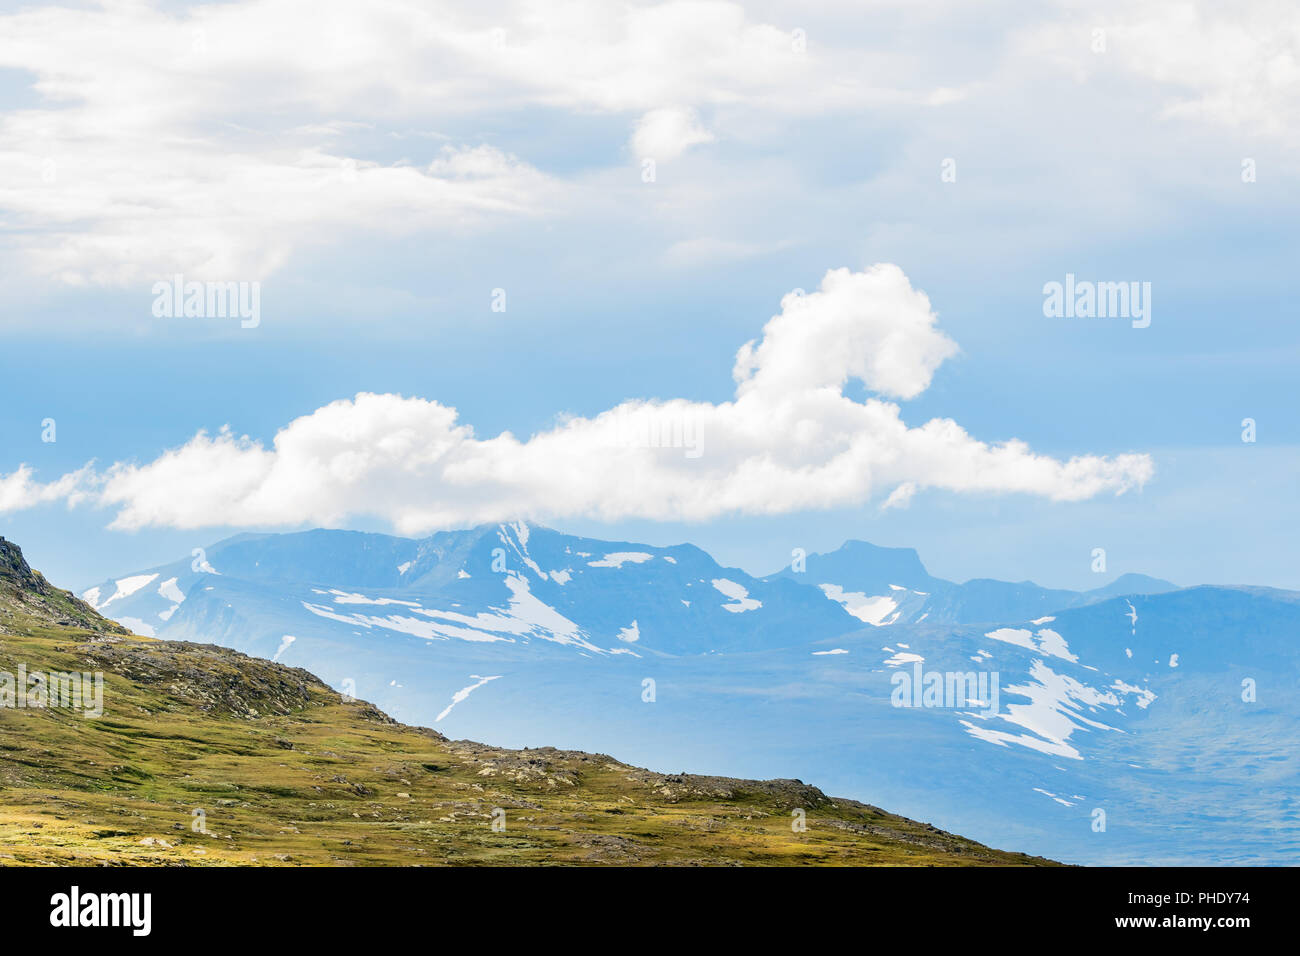 Cloud formation in the sky over a mountain Stock Photo